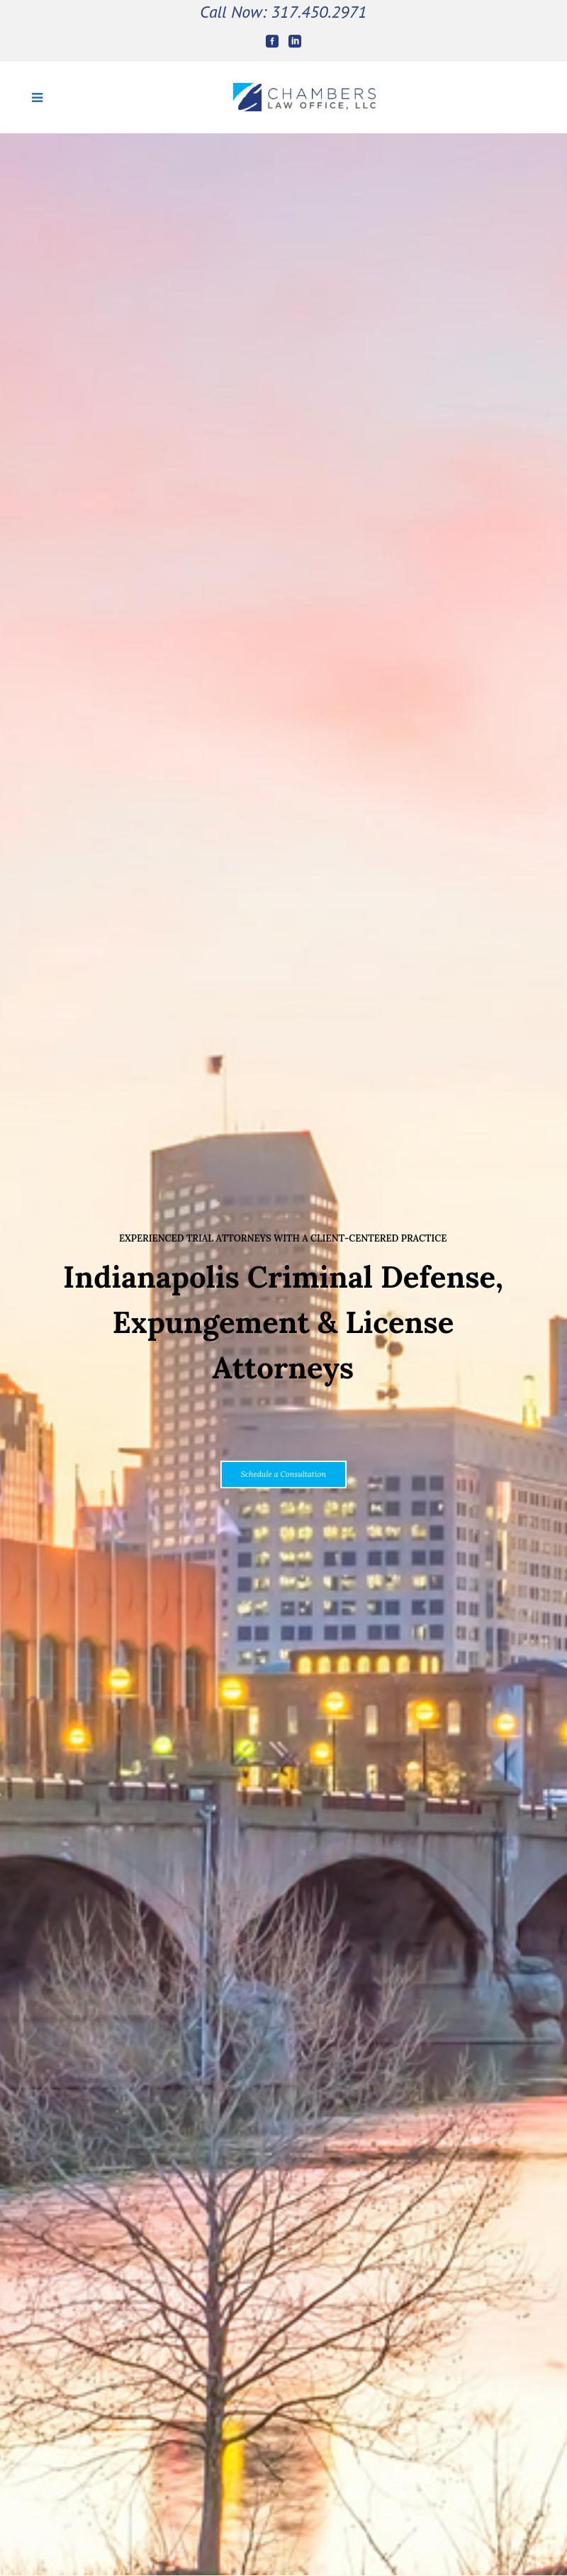 Chambers Law Office, LLC - Indianapolis IN Lawyers